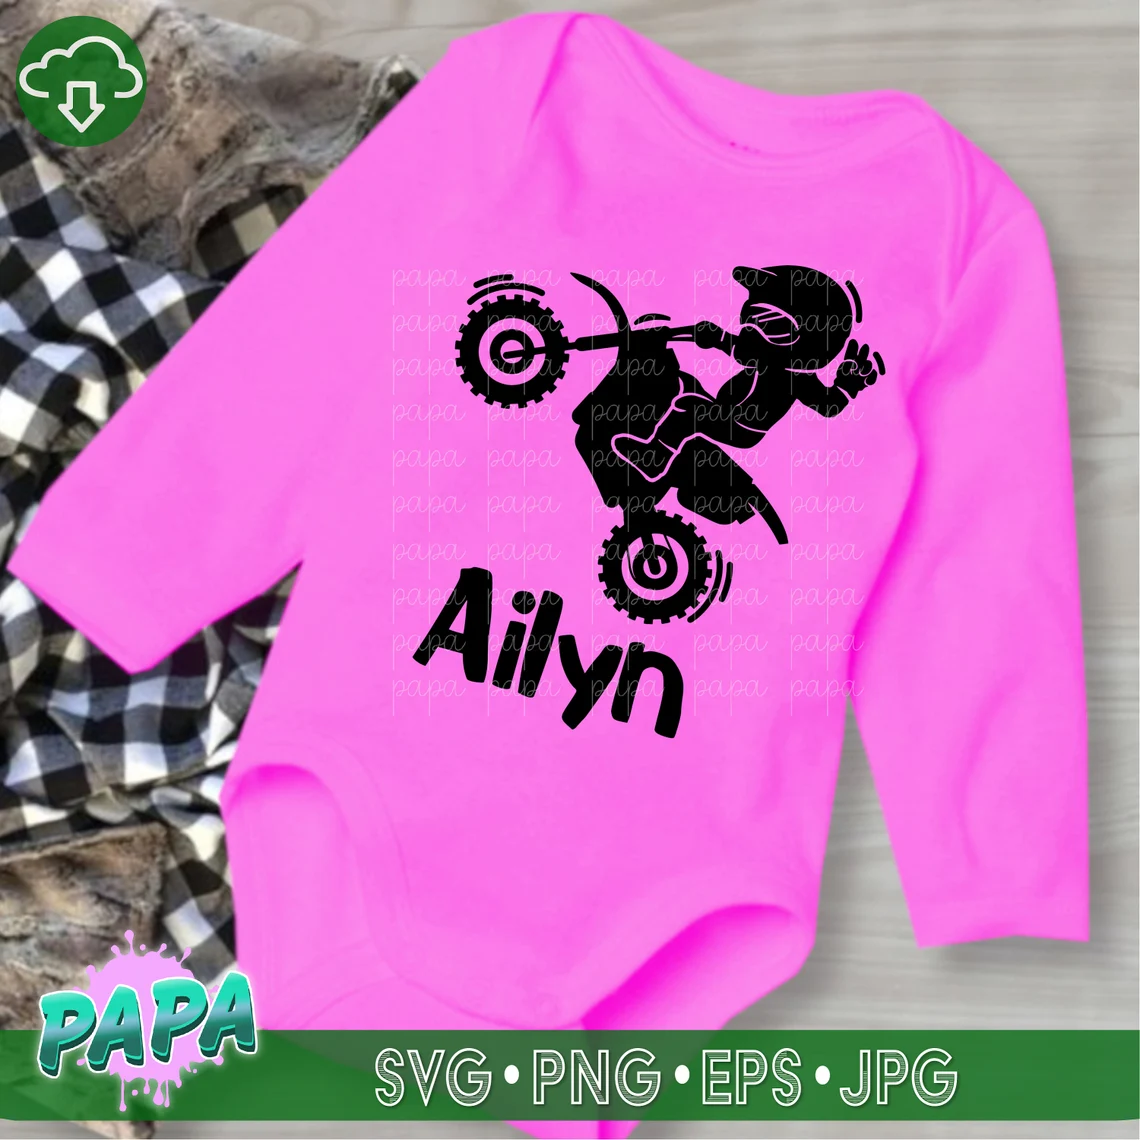 Children's print with a motorcyclist on a pink T-shirt.